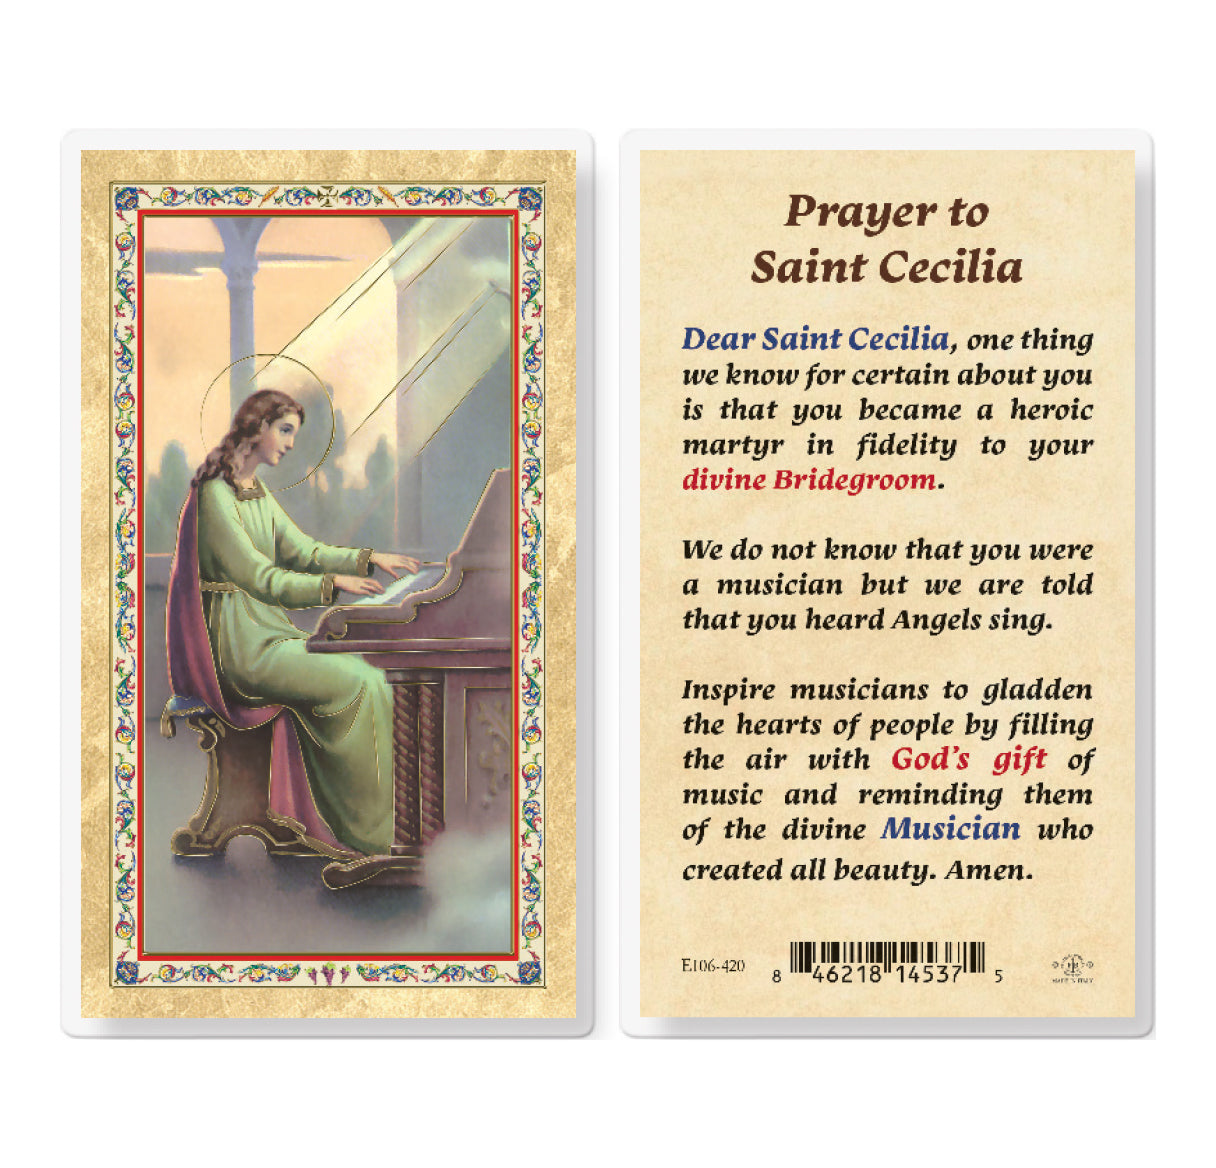 Prayer to St. Cecelia Gold-Stamped Laminated Catholic Prayer Holy Card with Prayer on Back, Pack of 25